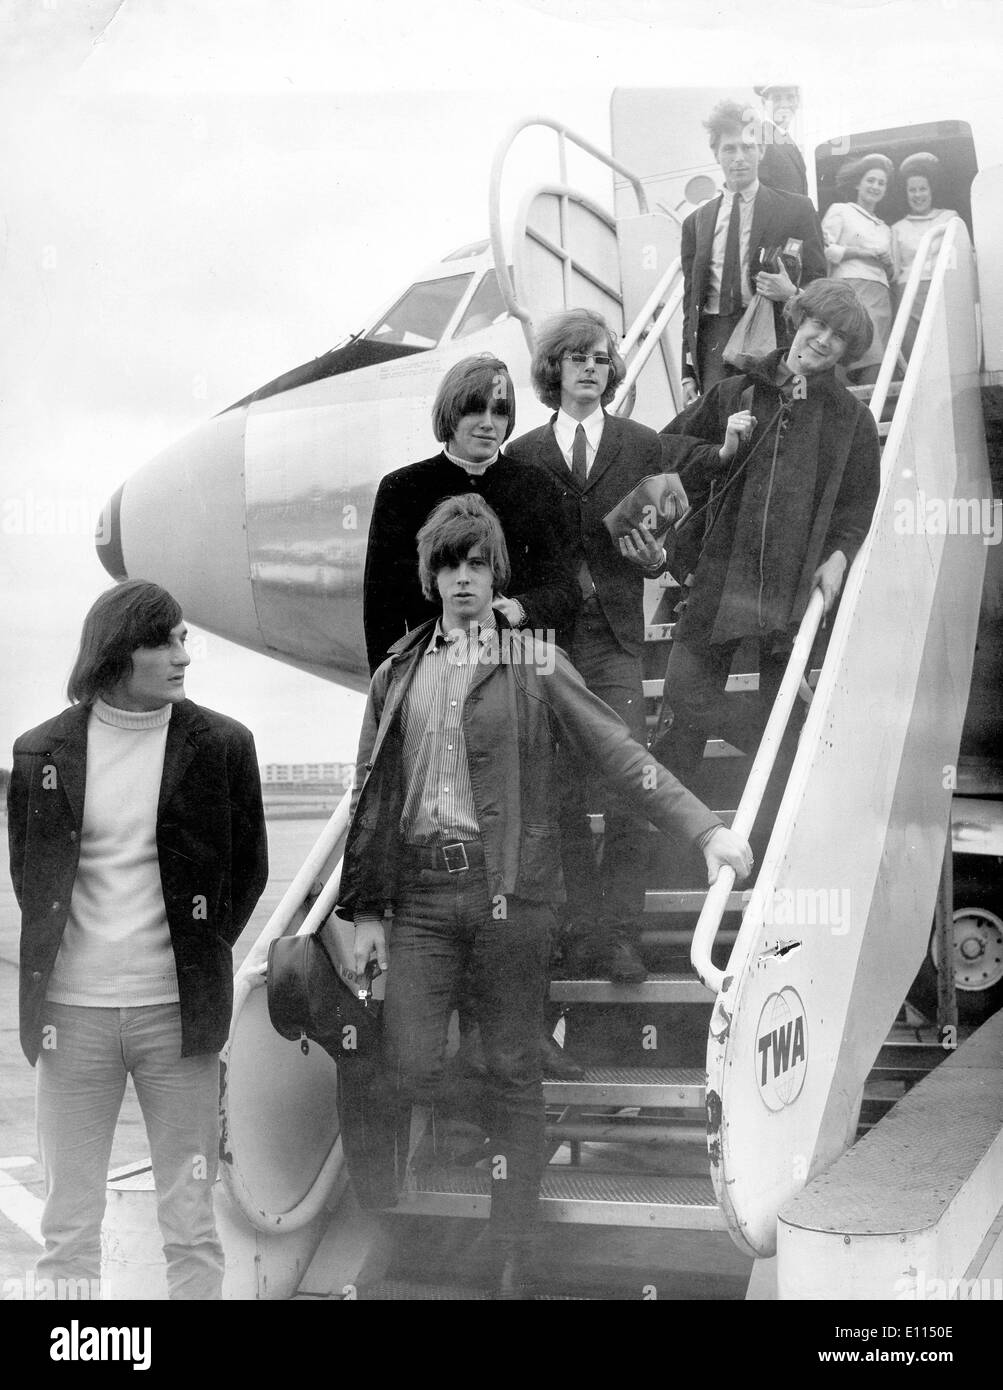 Rock Band The Byrds arrive in London Stock Photo